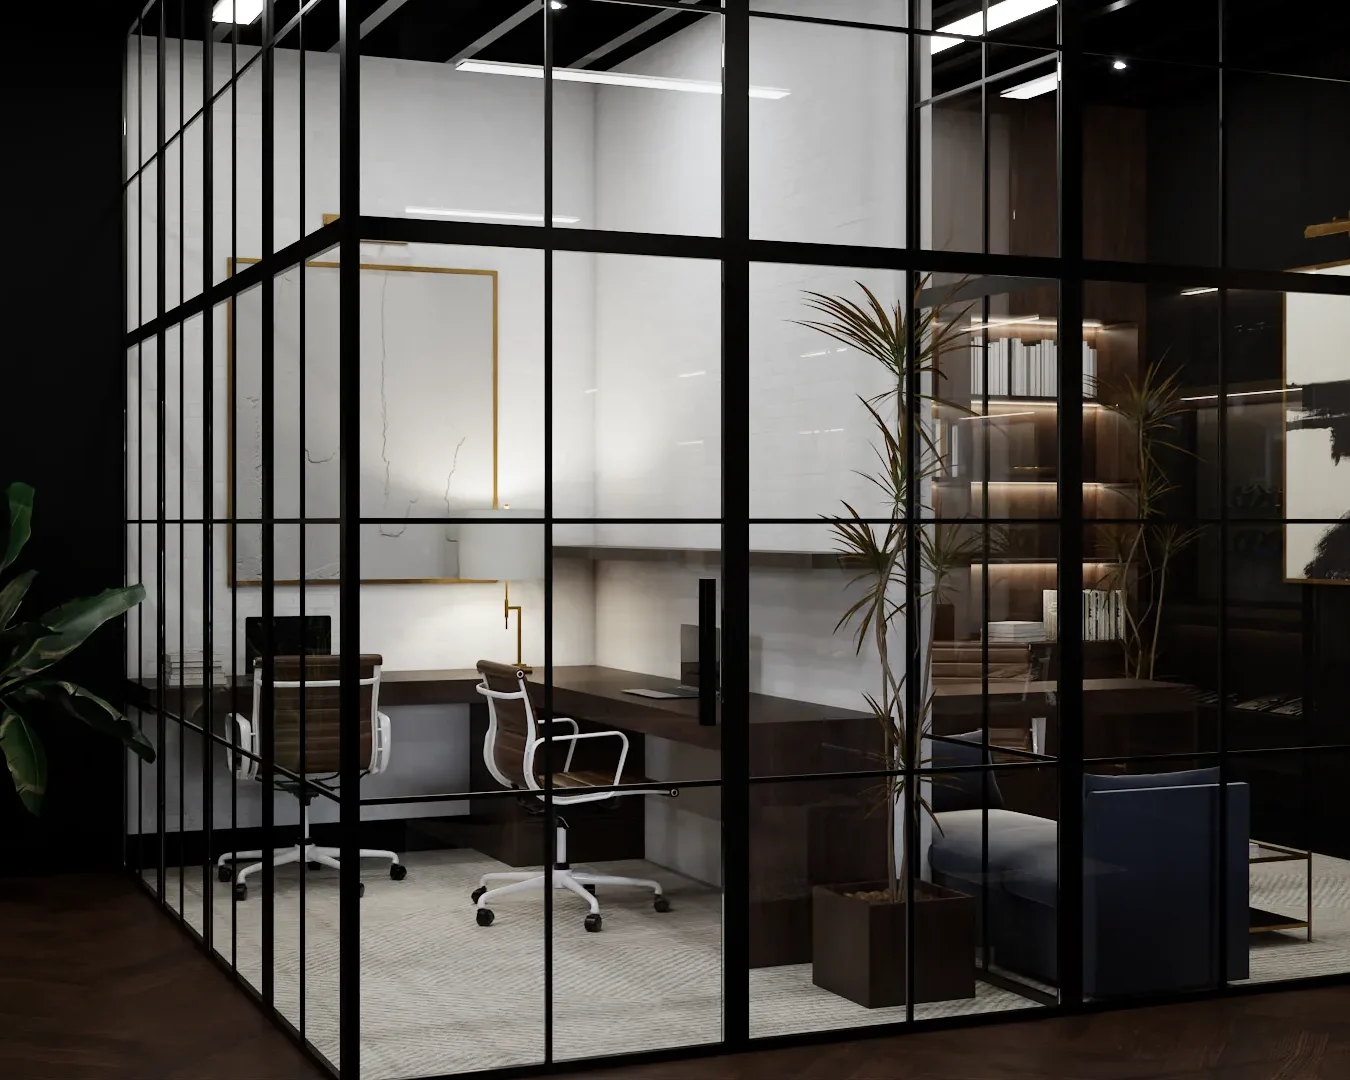 Modern office with glass partitions and sleek furnishings, promoting a blend of style and functionality, designed by Debora, an online interior design service based in New York City.